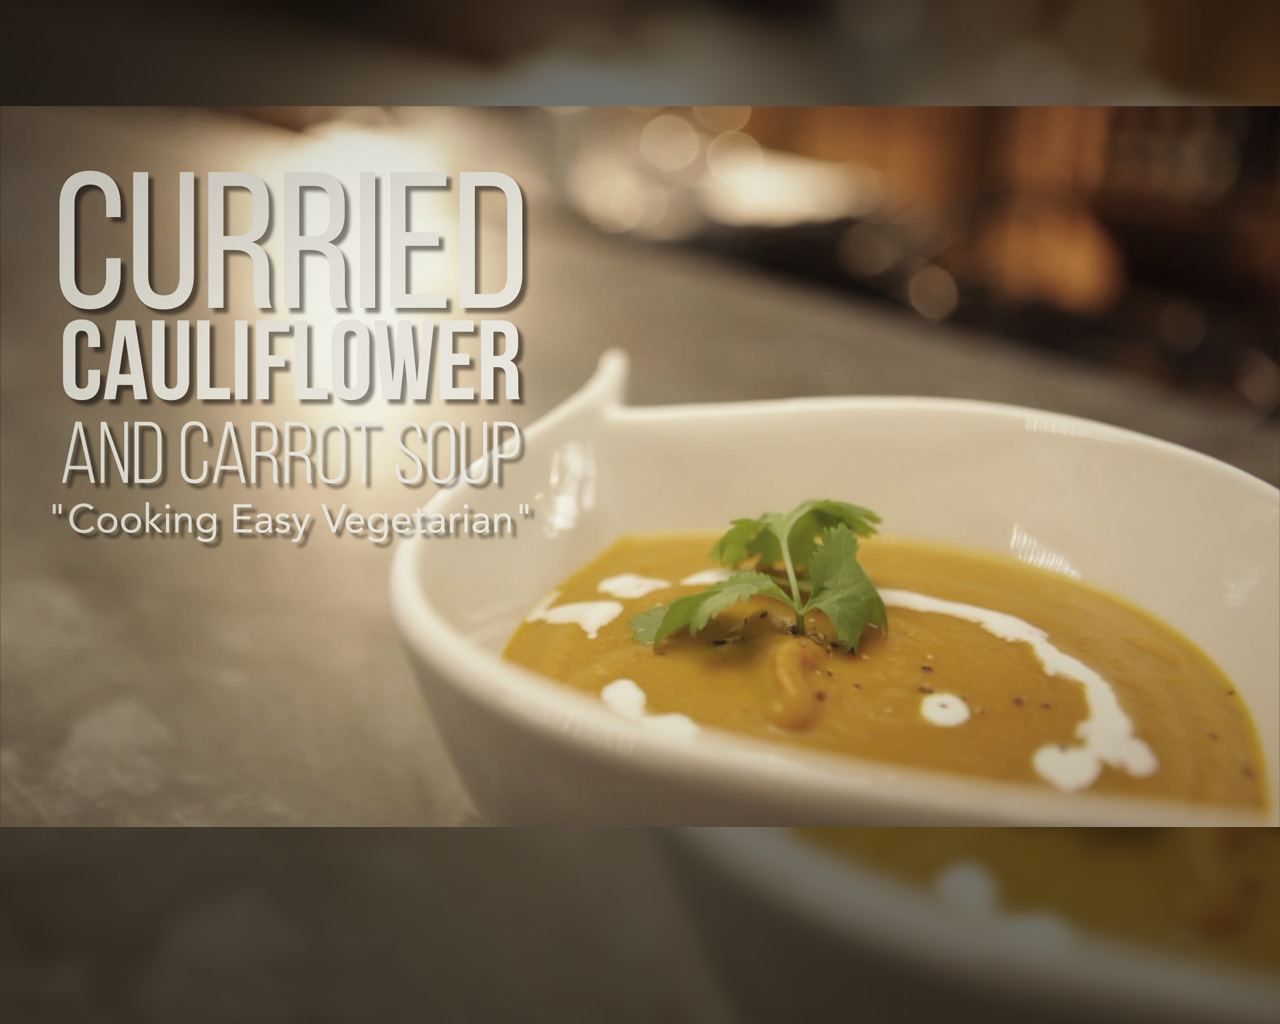 Curried Cauliflower and Carrot Soup